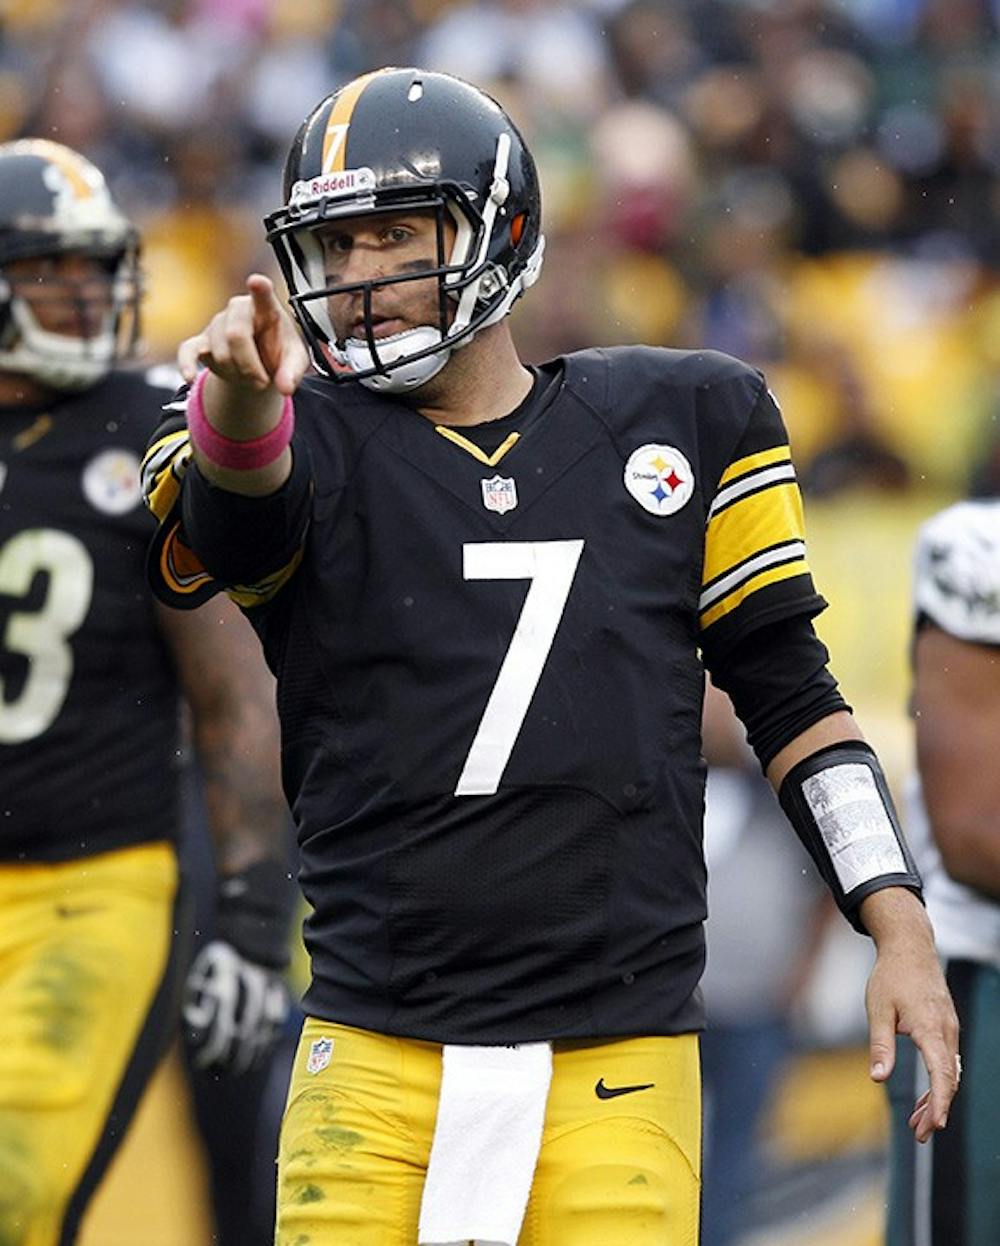 Pittsburgh Steelers&apos; Ben Roethlisberger points to the Steelers&apos; bench during the late fourth quarter winning drive against the Eagles on Sunday, October 7, 2012, in Pittsburgh, Pennsylvania. The Pittsburgh Steelers defeated the Philadelphia Eagles, 16-14. (Yong Kim/Philadelphia Daily News/MCT)